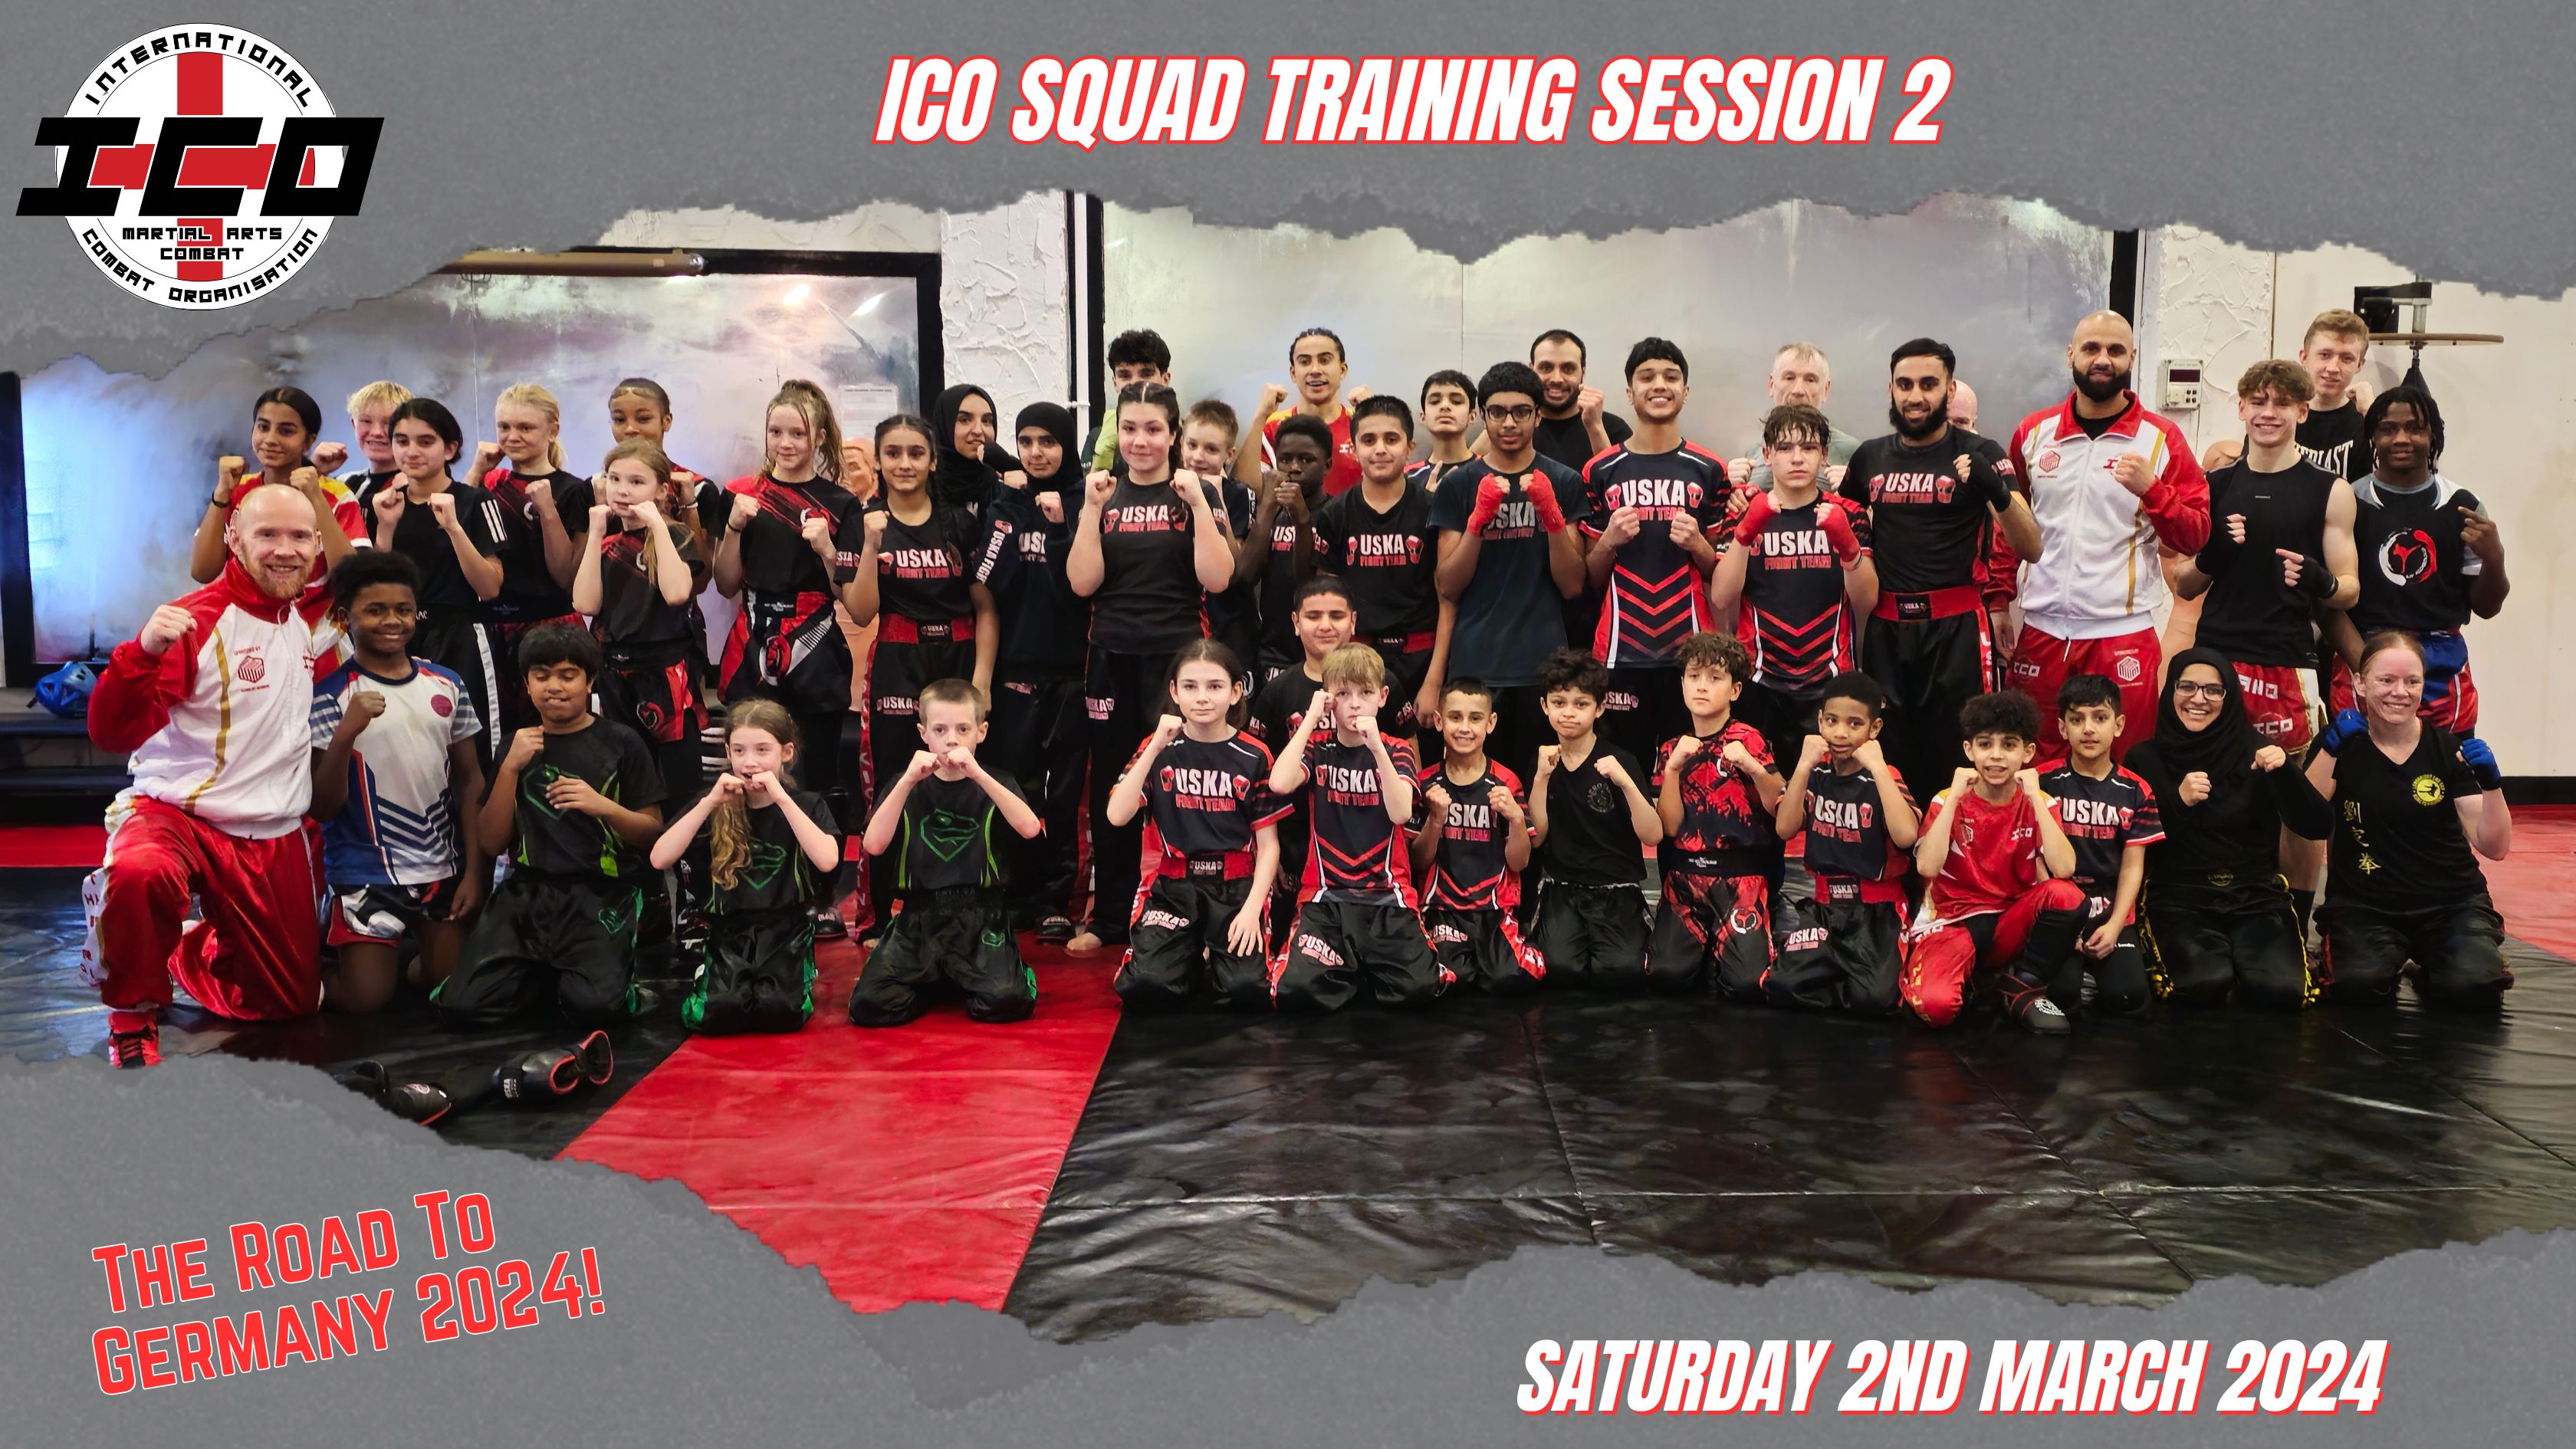 02-03-24 - Another Awesome Session At The 2nd ICO Squad Training!